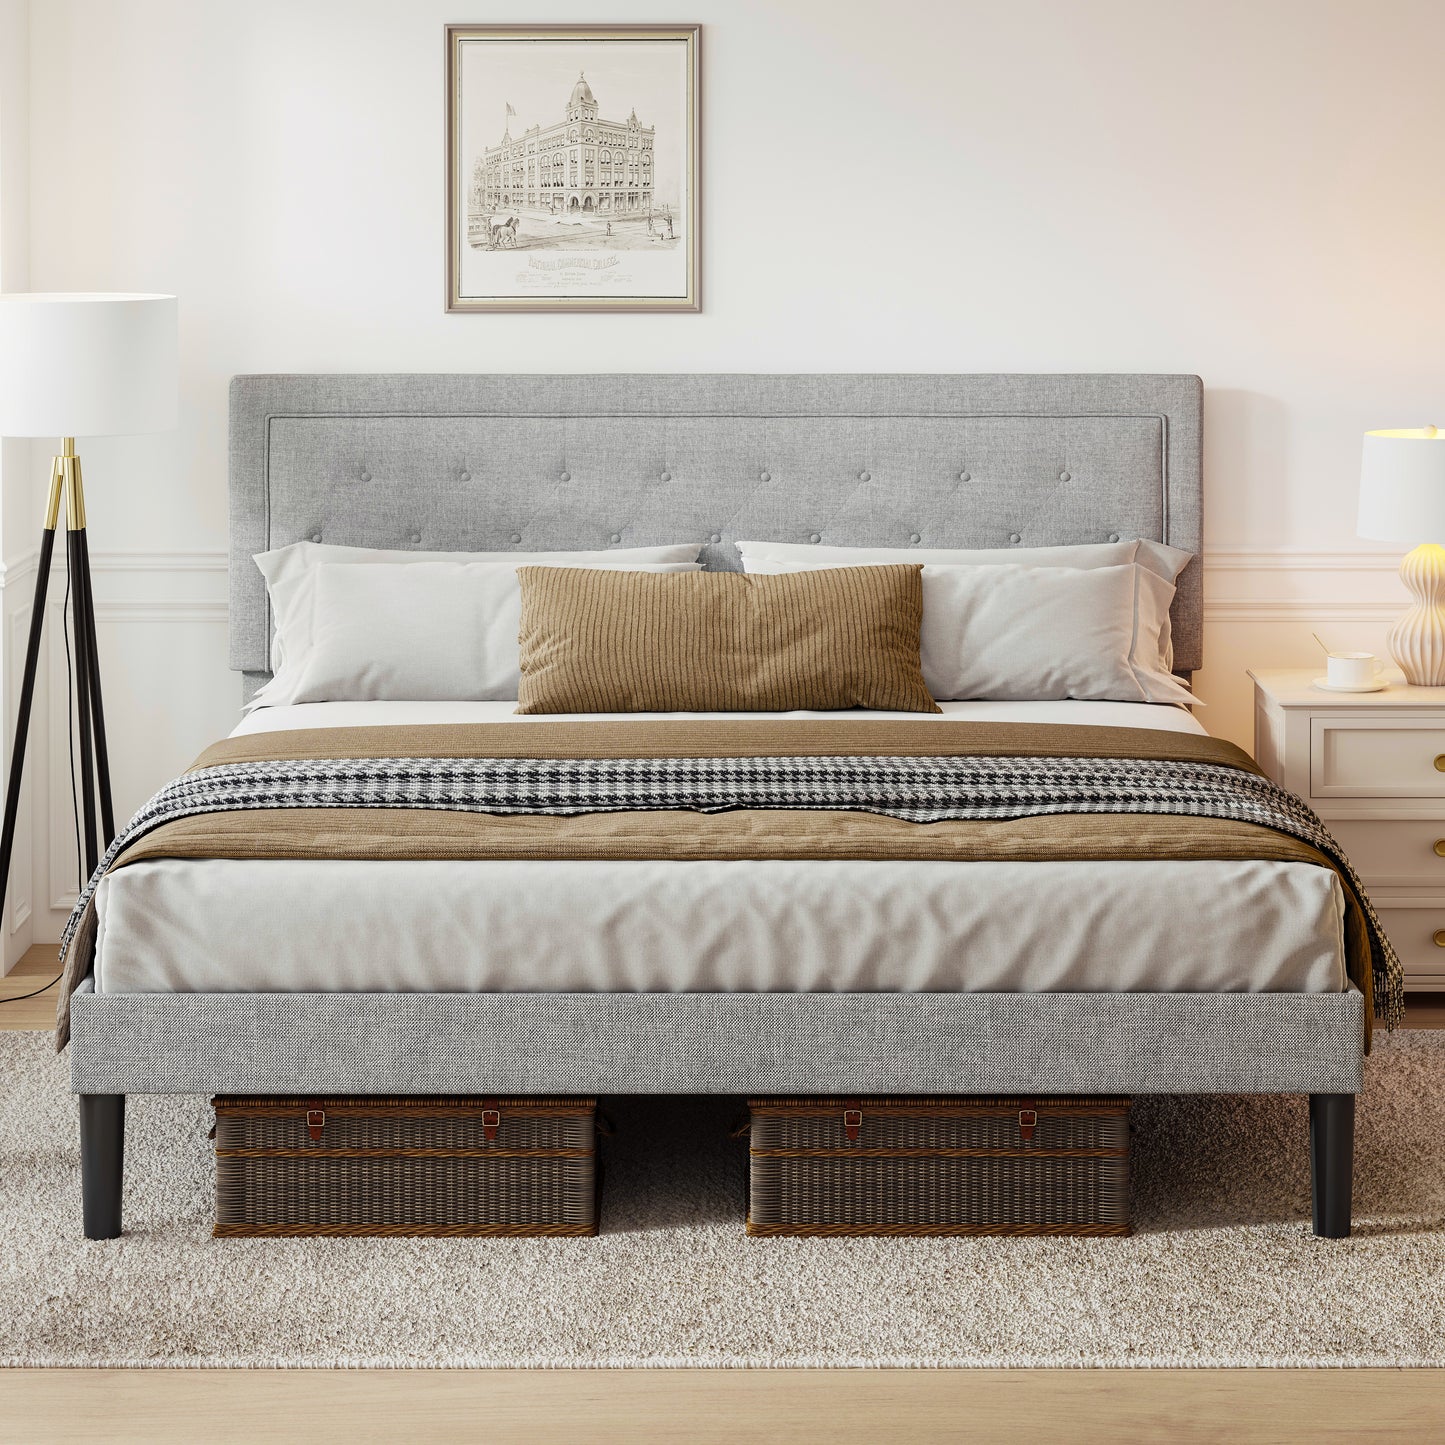 SYNGAR Queen Size Bed Frame, Fabric Upholstered Platform Bed Frame with Adjustable Button Tufted Headboard, Bedroom Furniture with Strong Wooden Slat Support, No Box Spring Needed, Light Gray